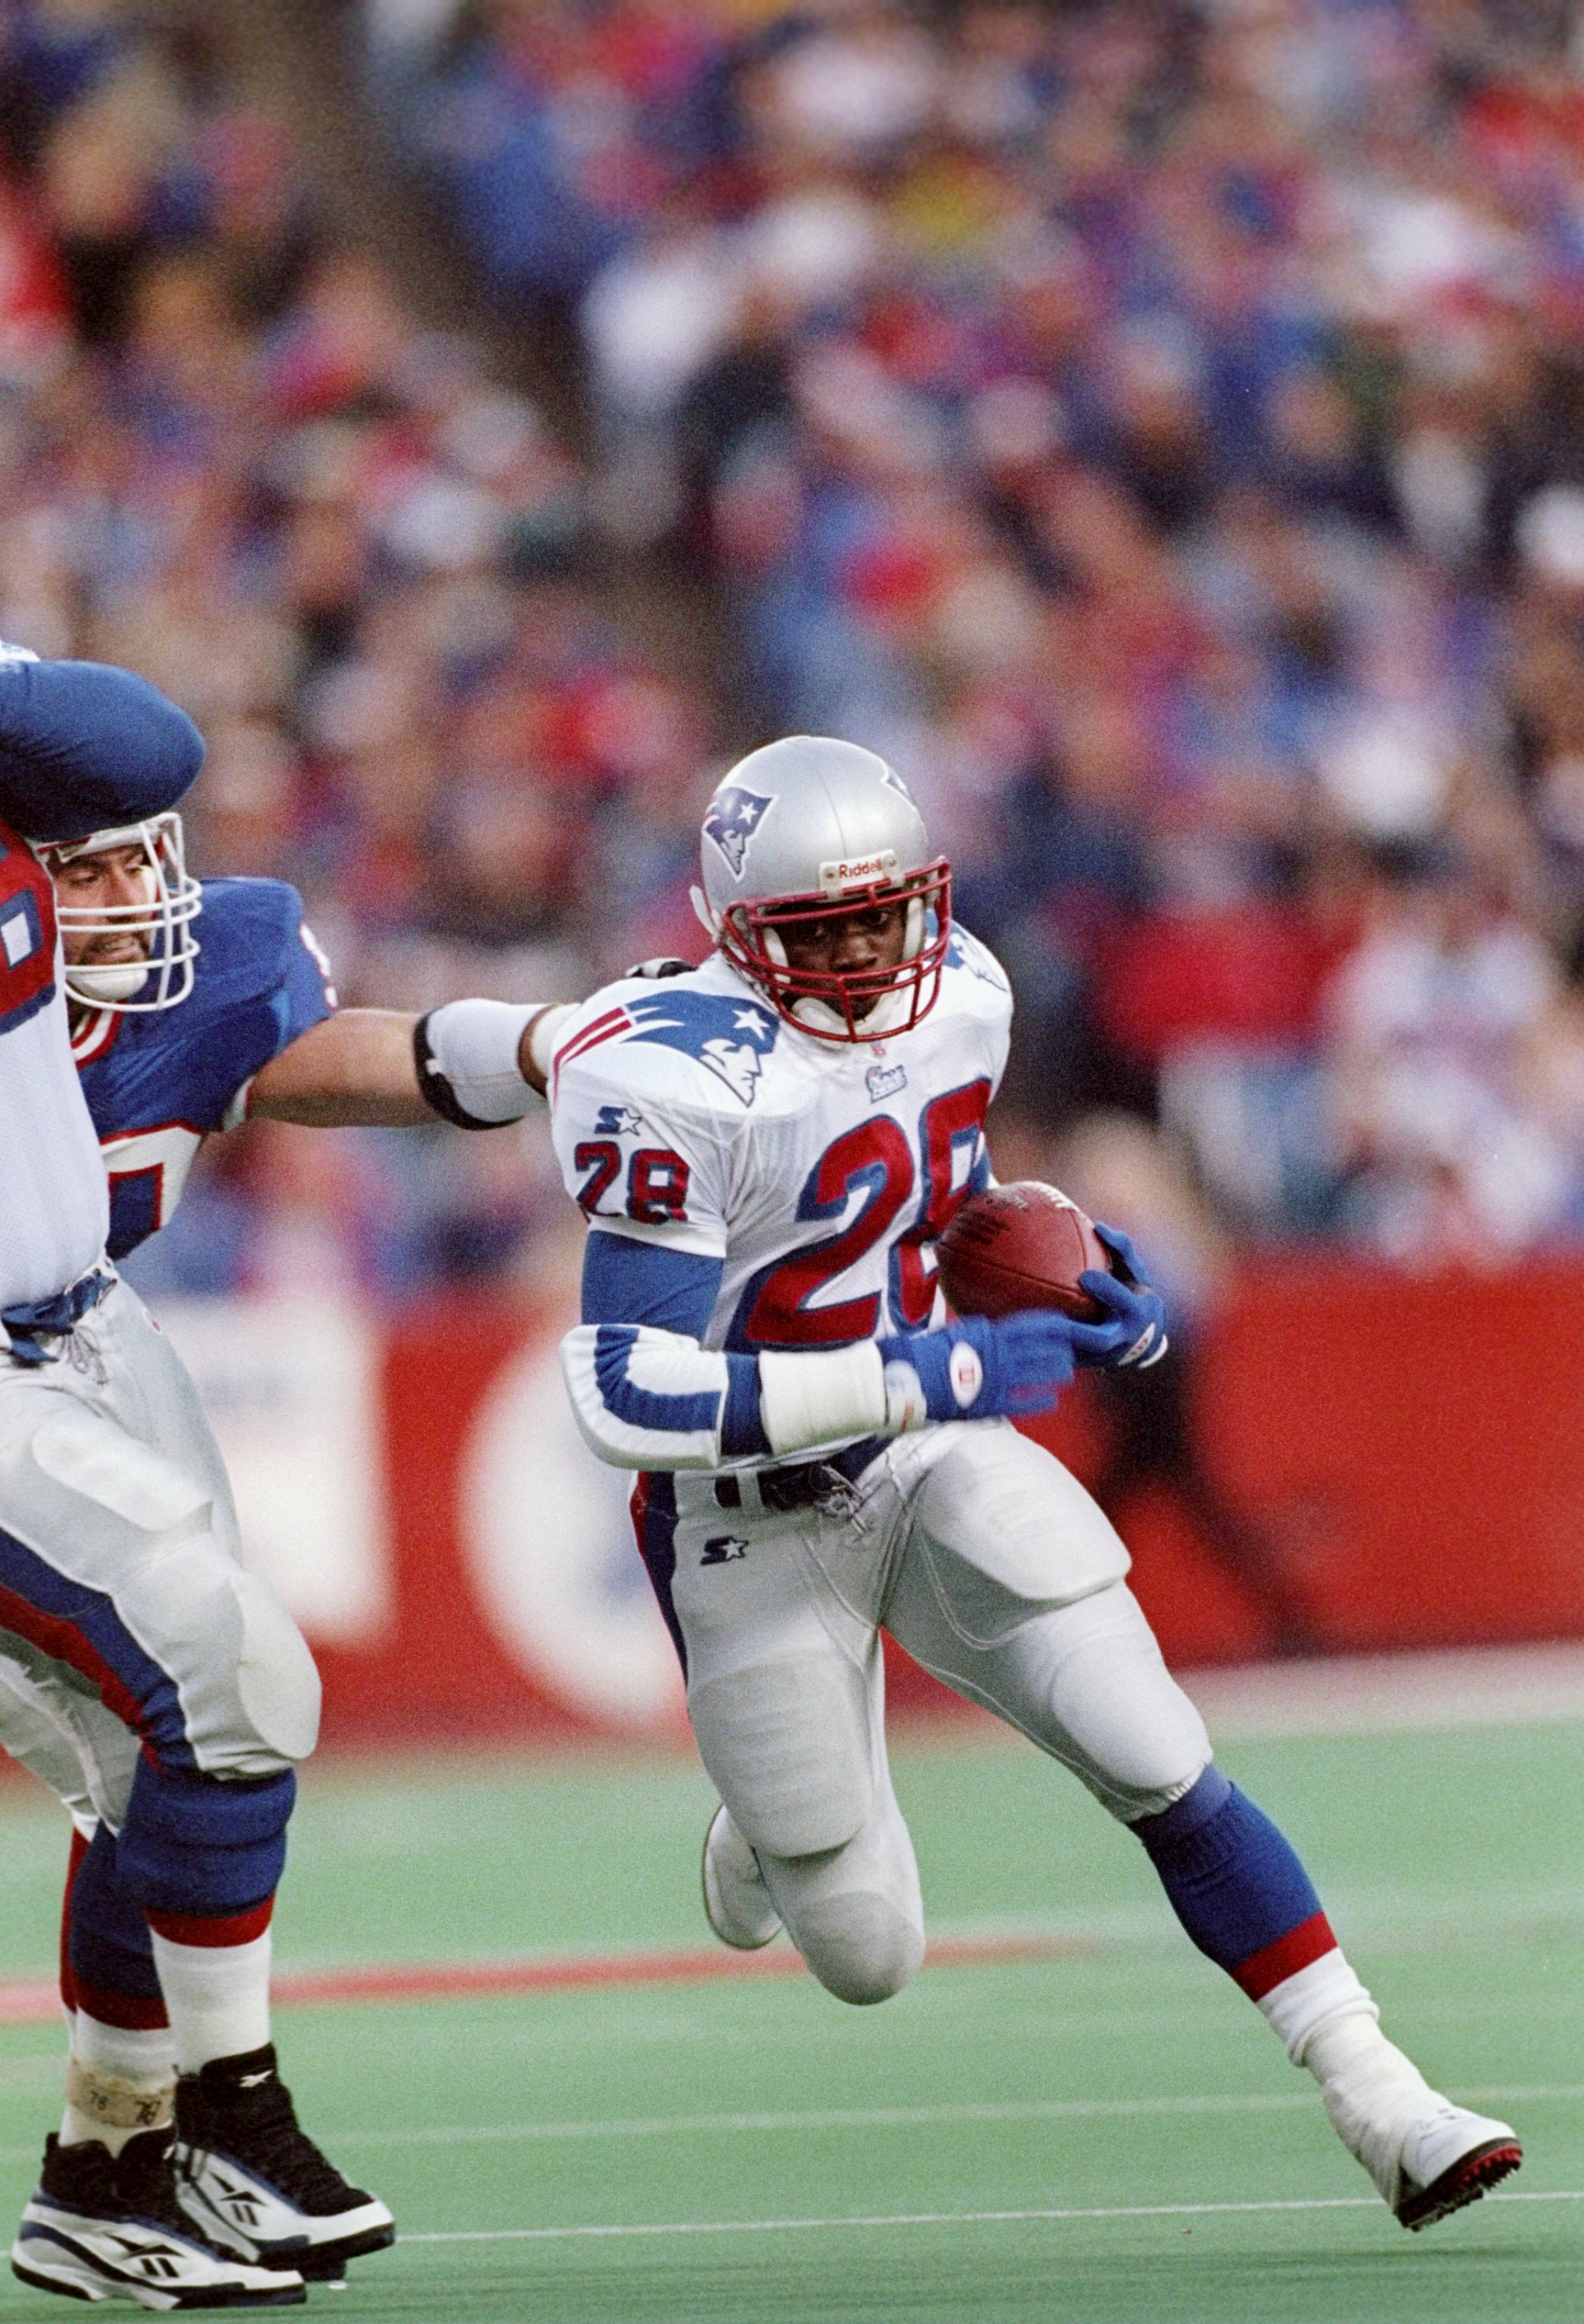 New England Patriots - 1997: Willie McGinest at the 1997 NFL Pro